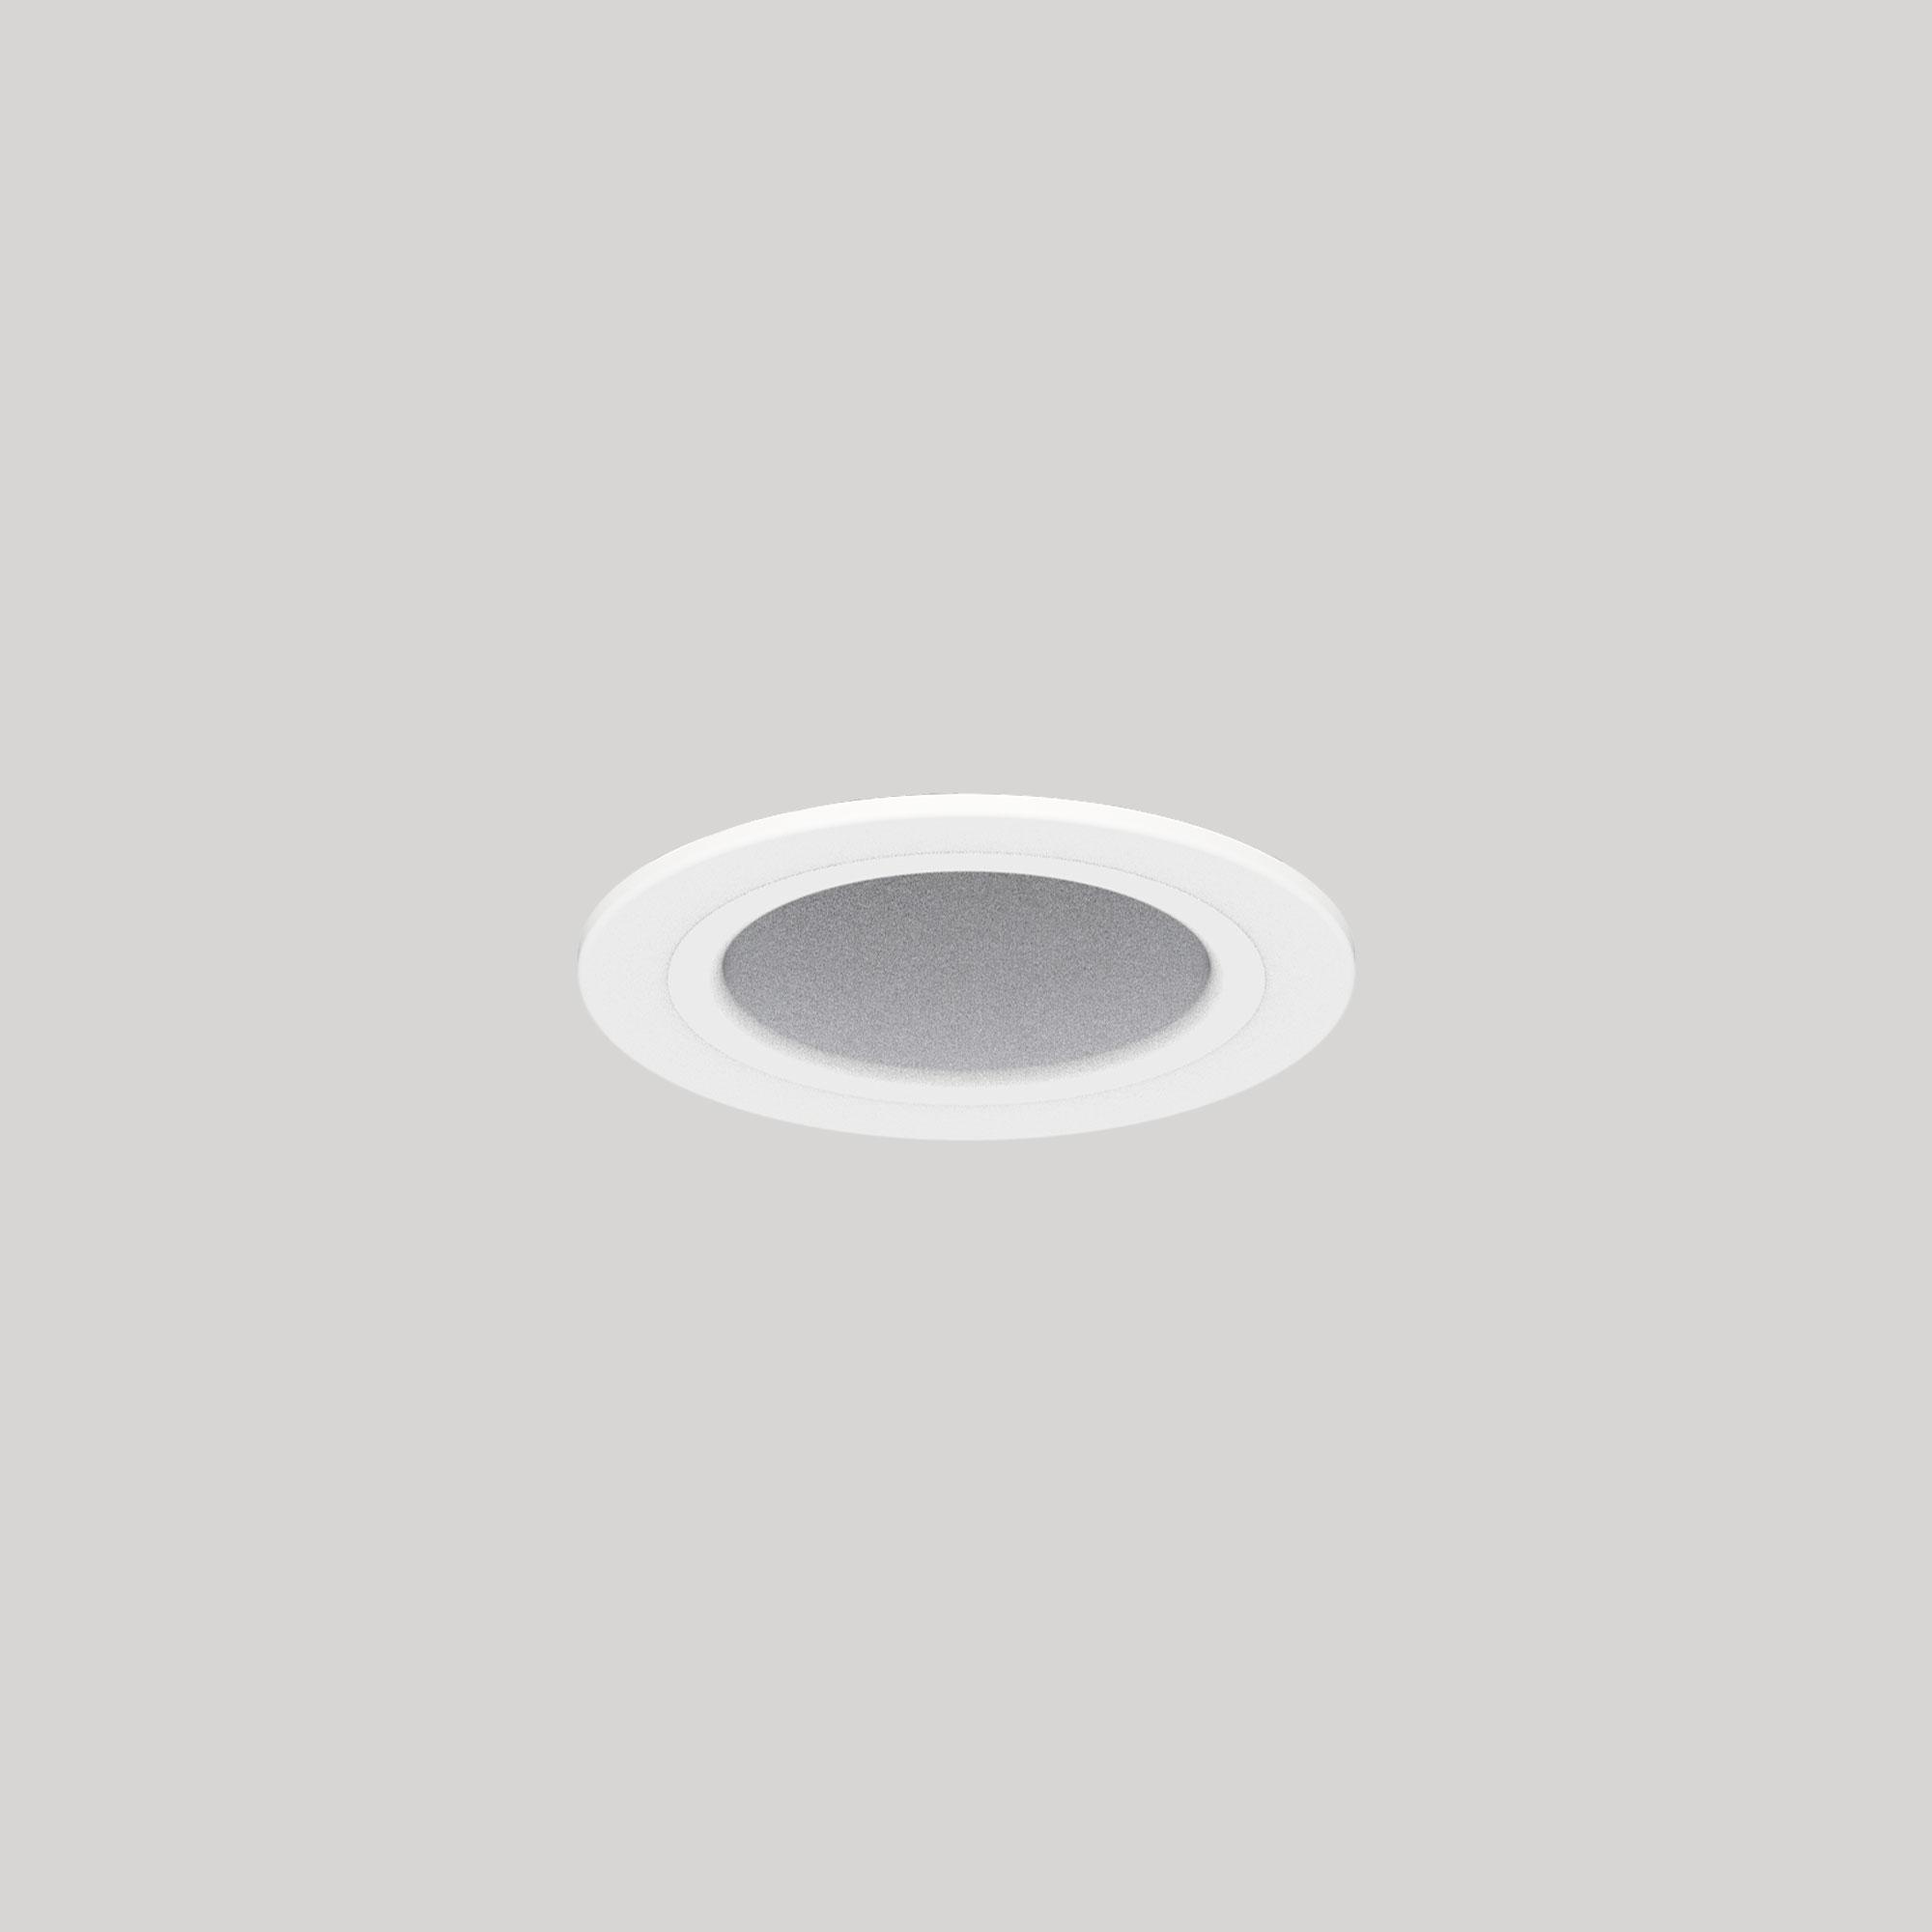 Standard 51mm Ceiling Recessed Round Fixed STD-A00A0E-WWP - Standard-STD-A00-WW-Installed.jpg